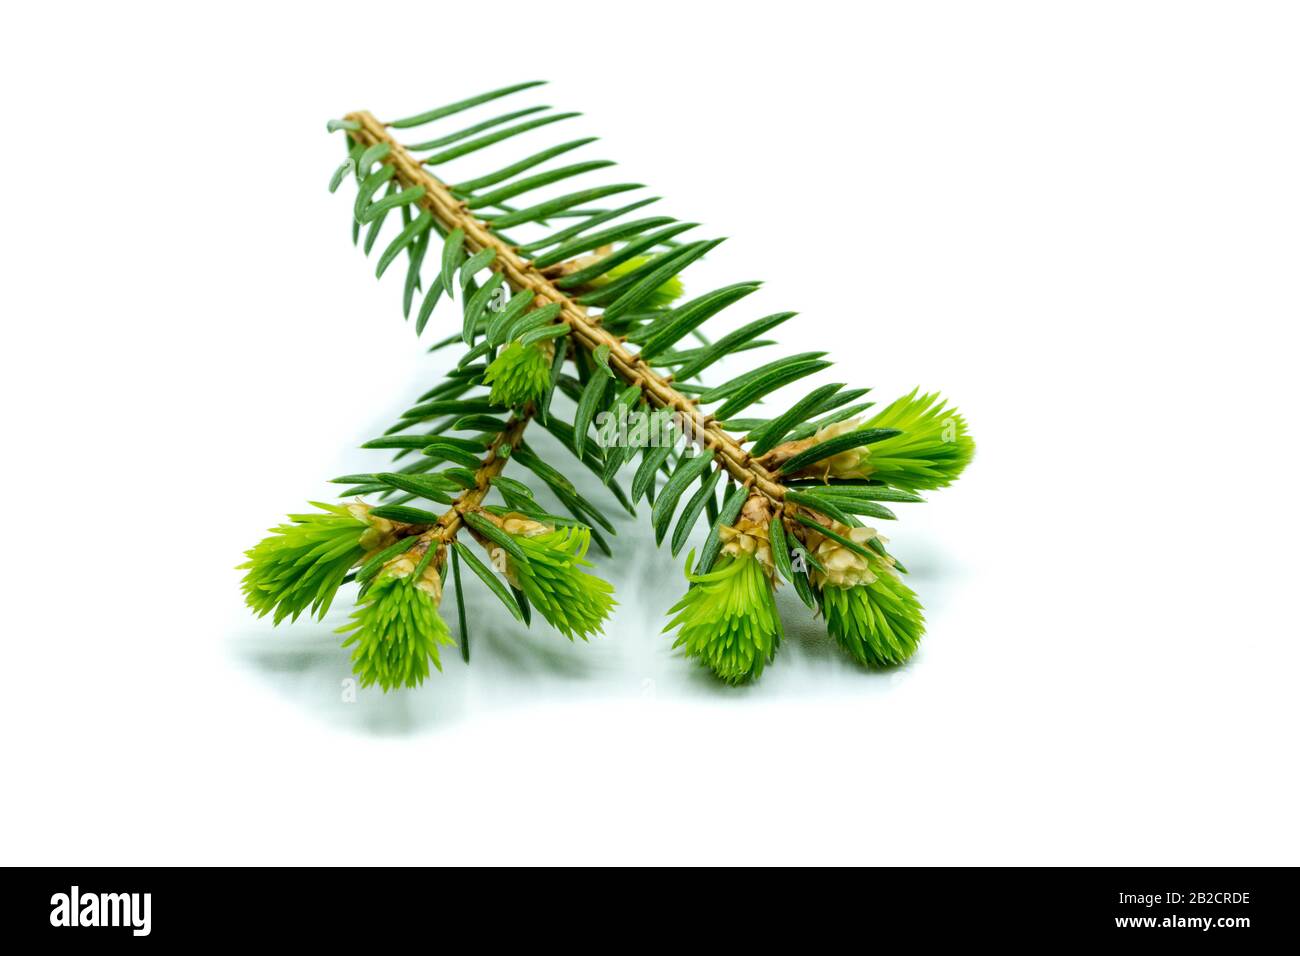 flowering pine branch isolated on white background Stock Photo